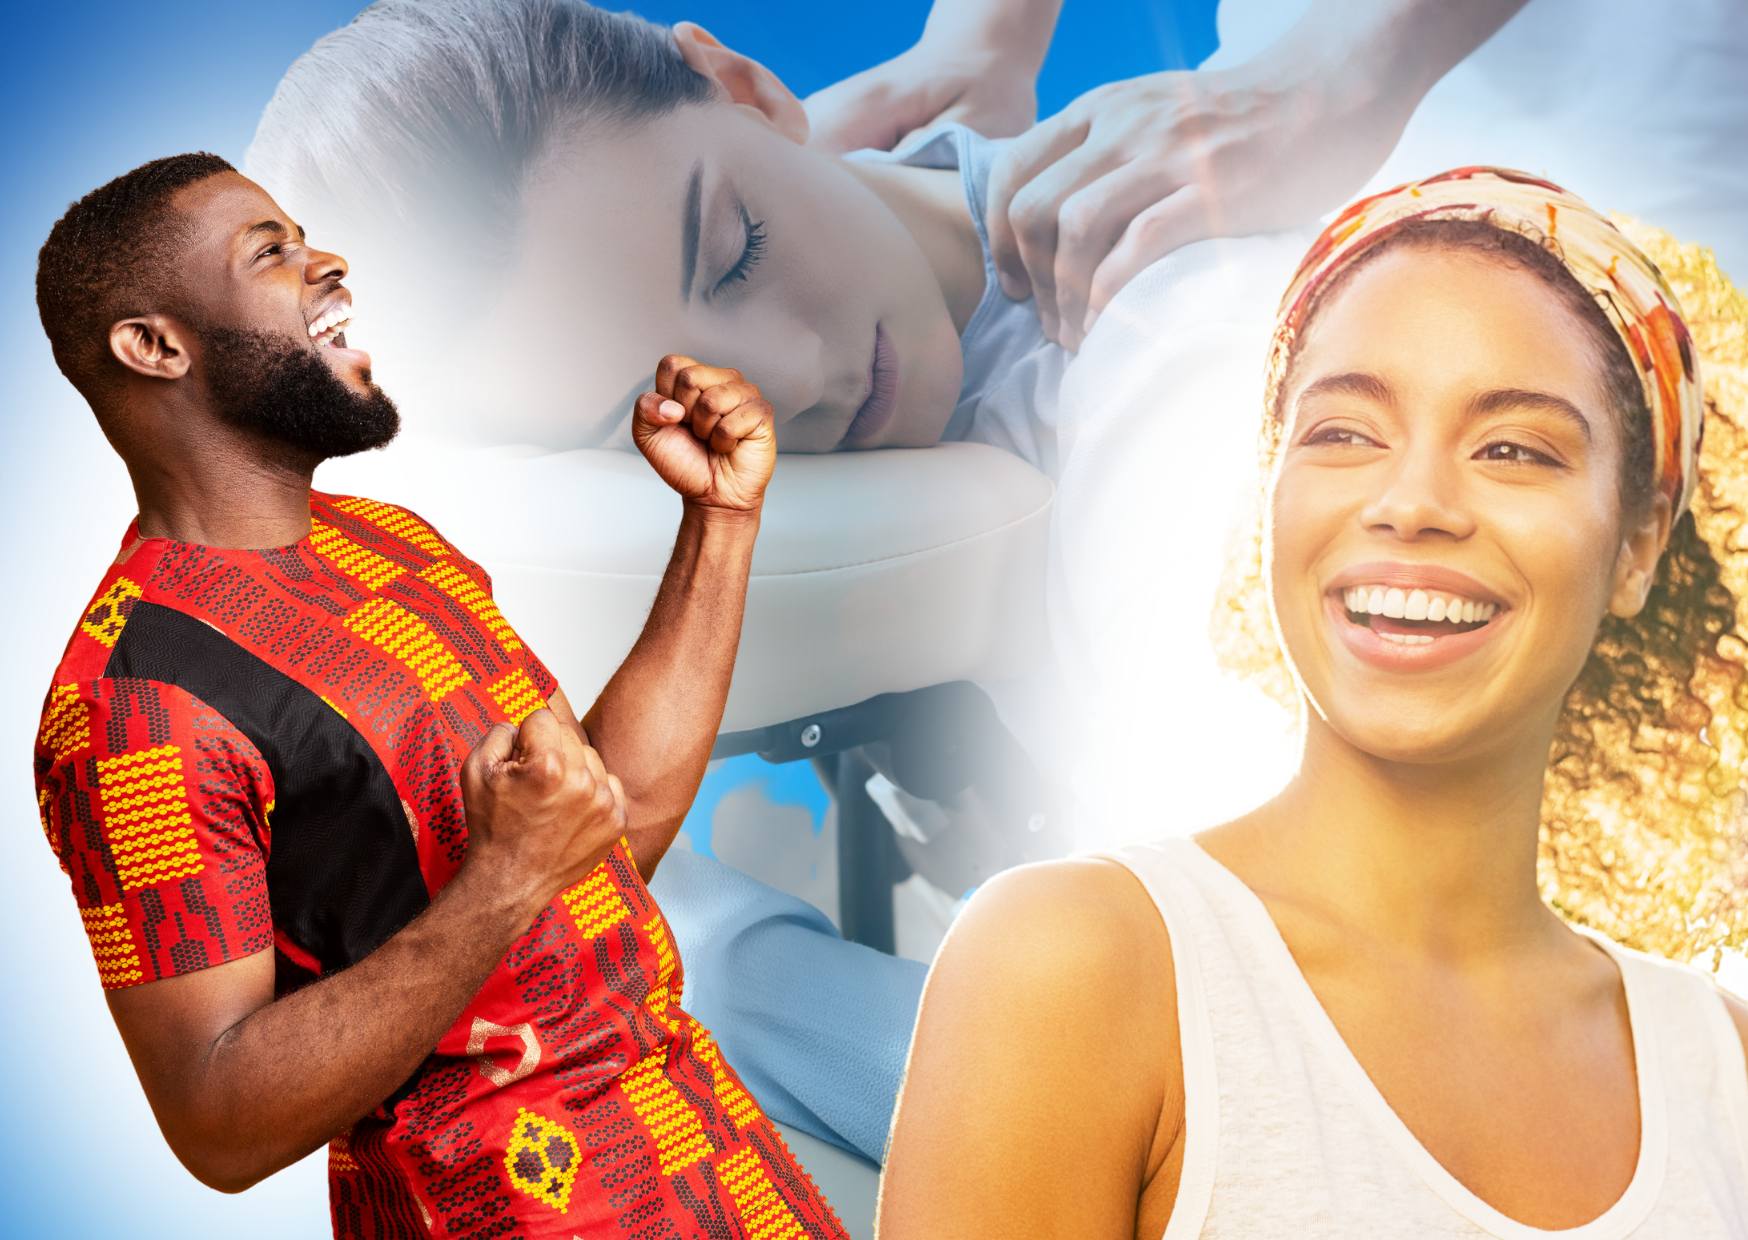 man-celebrating-on-the-left-woman-smiling-on-the-right-lady-getting-on-site-massage-in-the-background